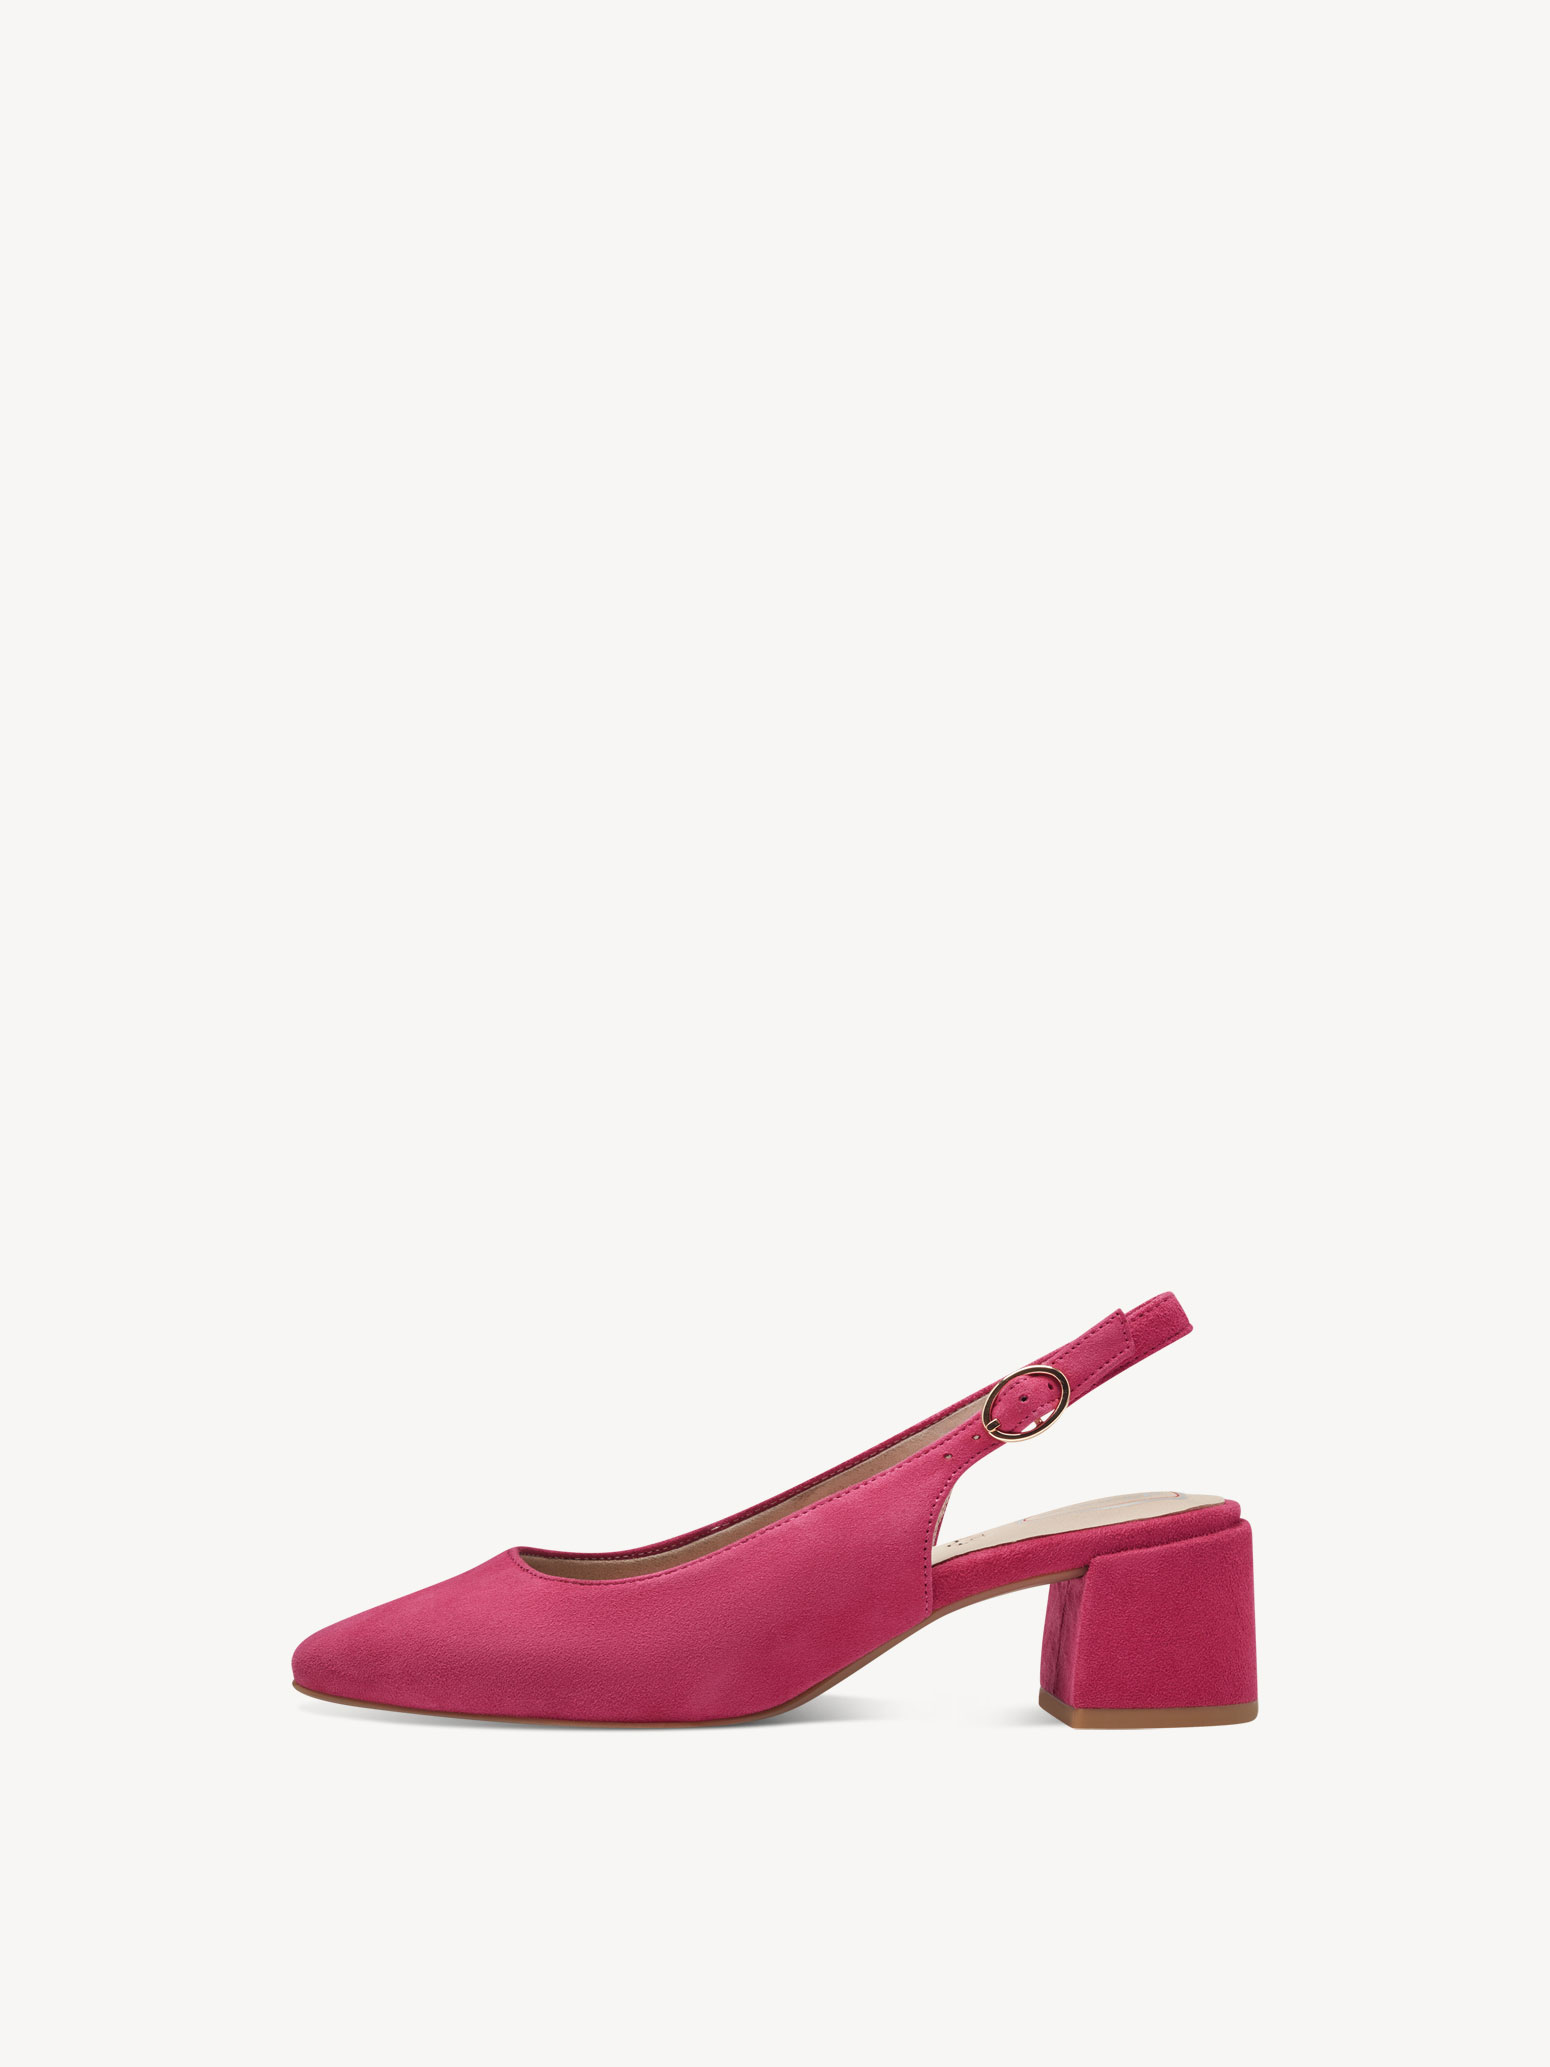 Leather sling pumps - pink